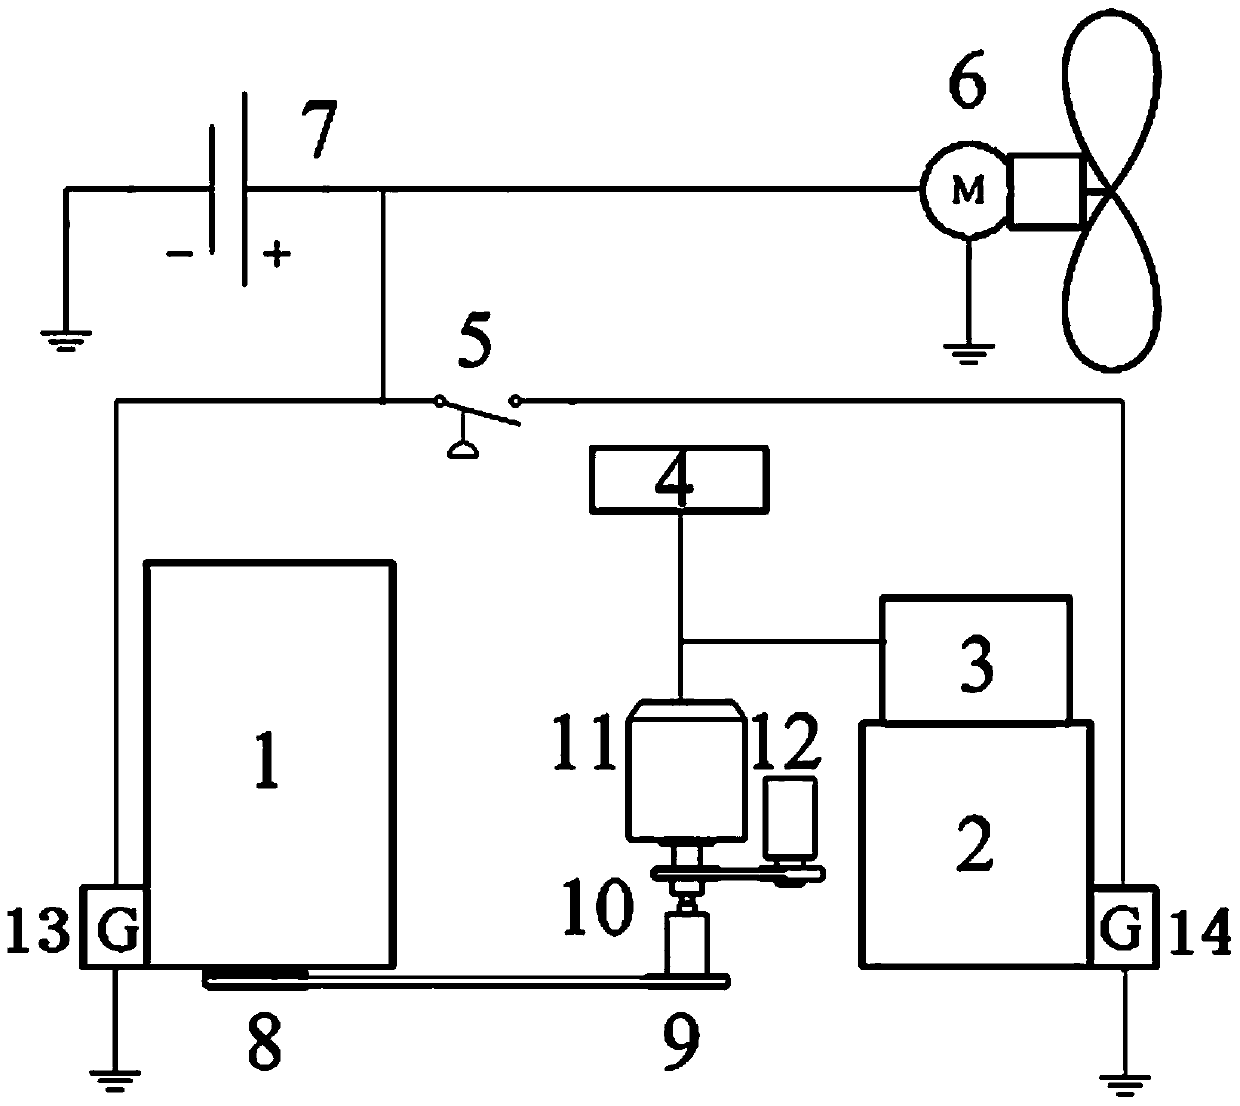 A vehicle power supply system